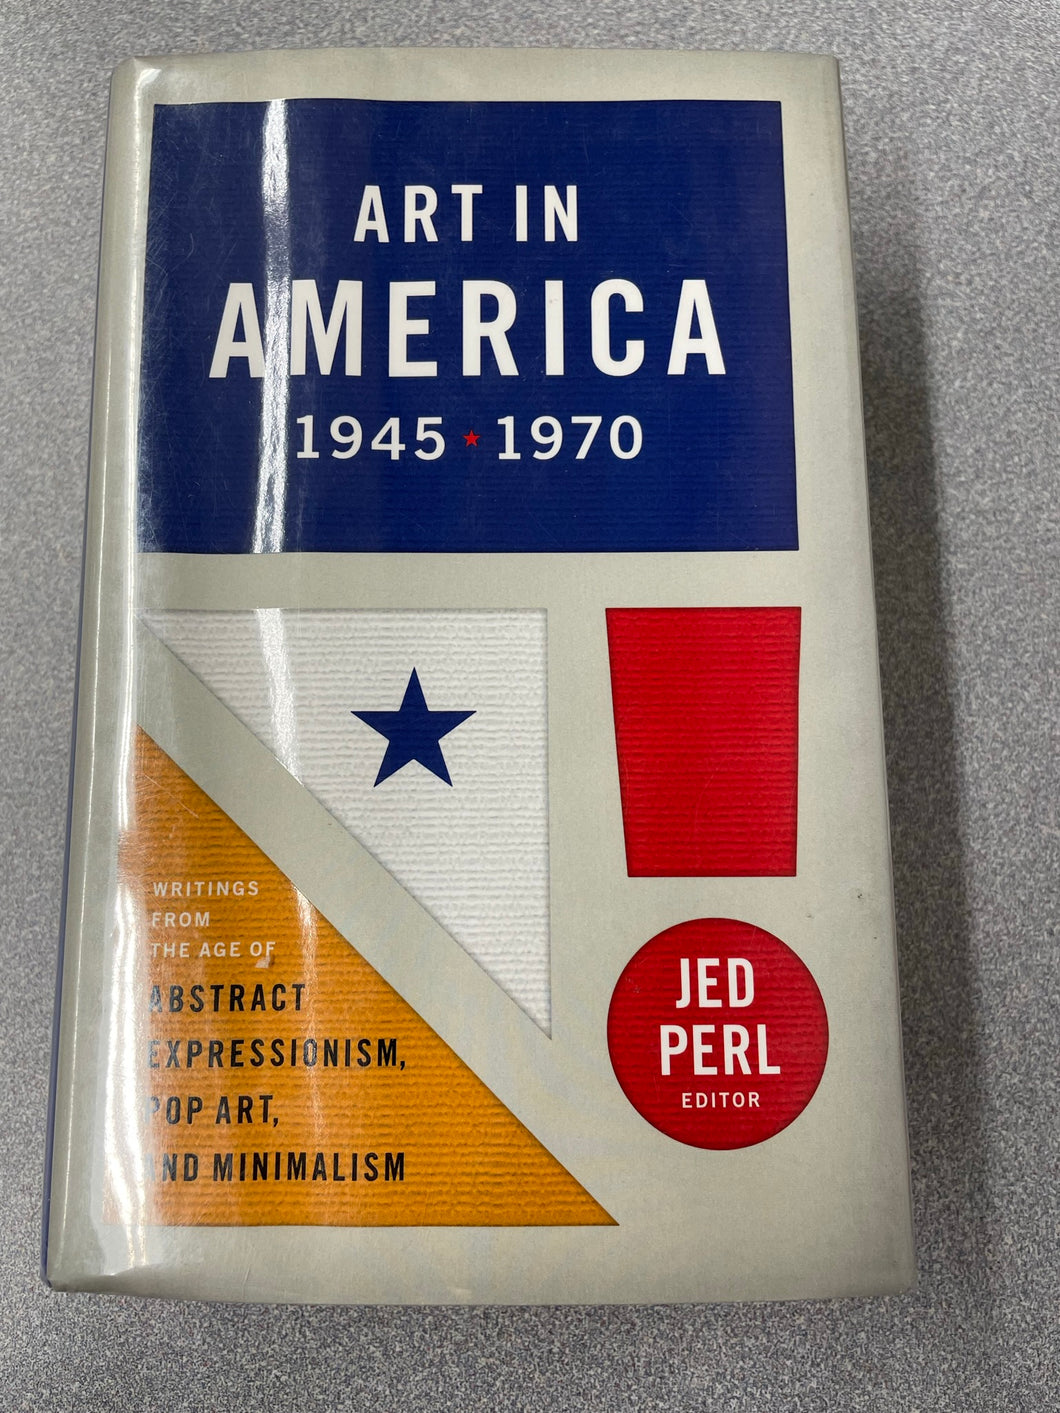 Art In American 1945-1970: Writings From the Age of Abstract Expressionism, Pop Art, and Minimalism, Perl, Jed, ed., [2014] A 9/23